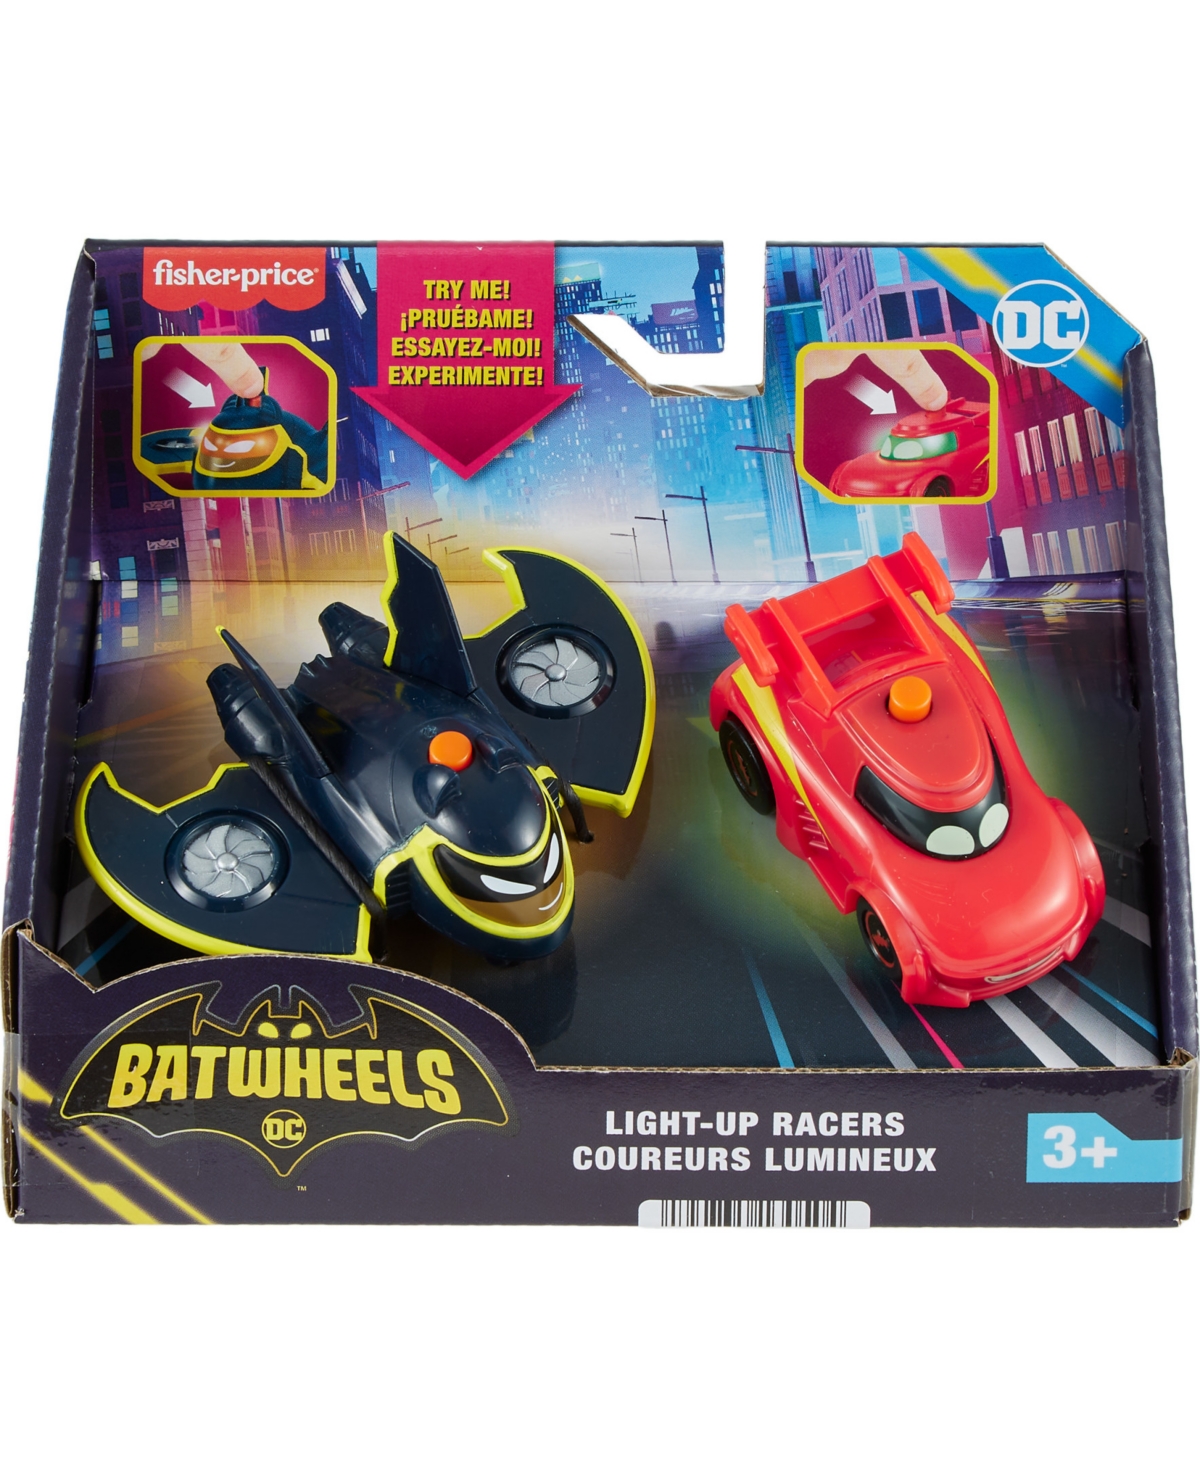 Batwheels Kids' Fisher-price Dc Light-up 1:55 Scale Toy Cars 2-pack Collection Set In Multi-color